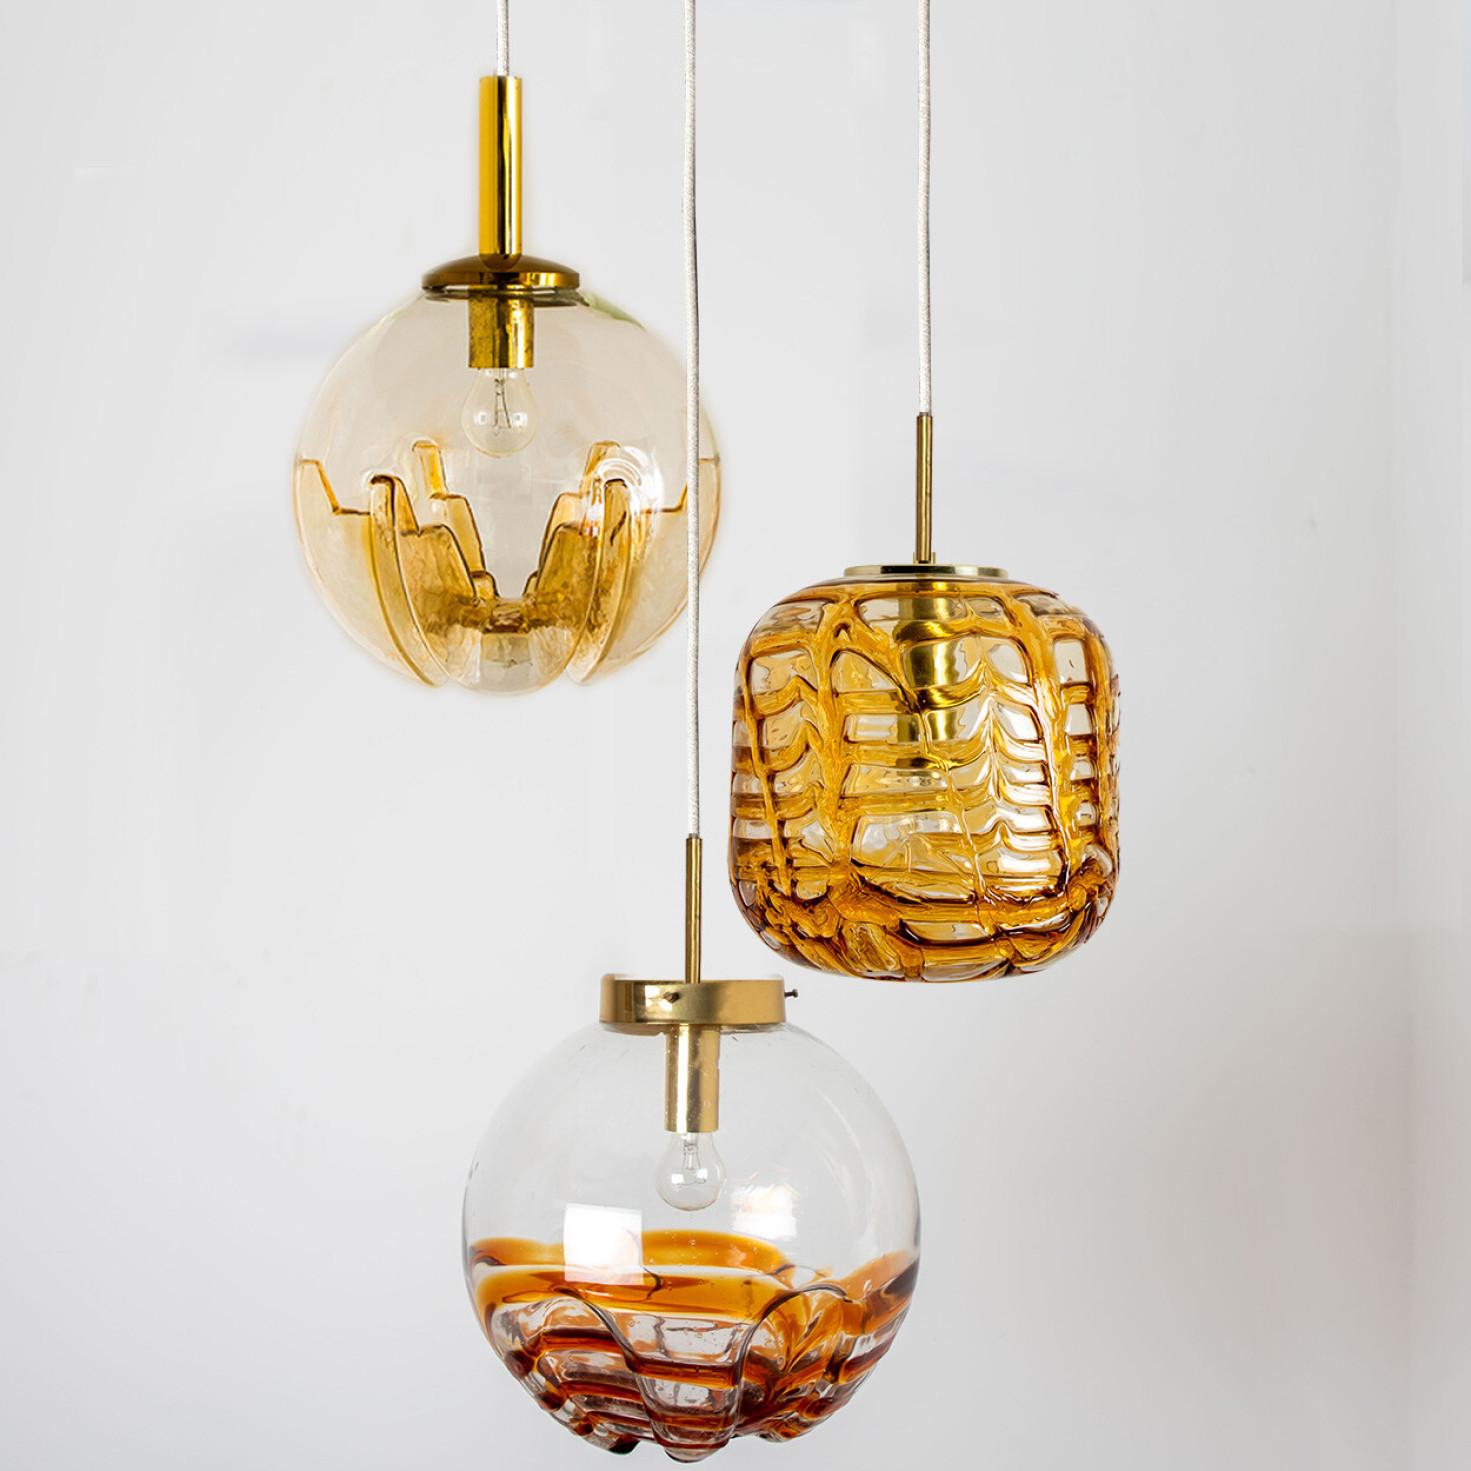 A collection of beautiful and stylish glass pendant lights made in Germany and Italy around the 1960's. The Doria light is made of yellow clear glass in a bubble shape. The Kaiser light is made of clear red-brown glass and the Mazzega light is